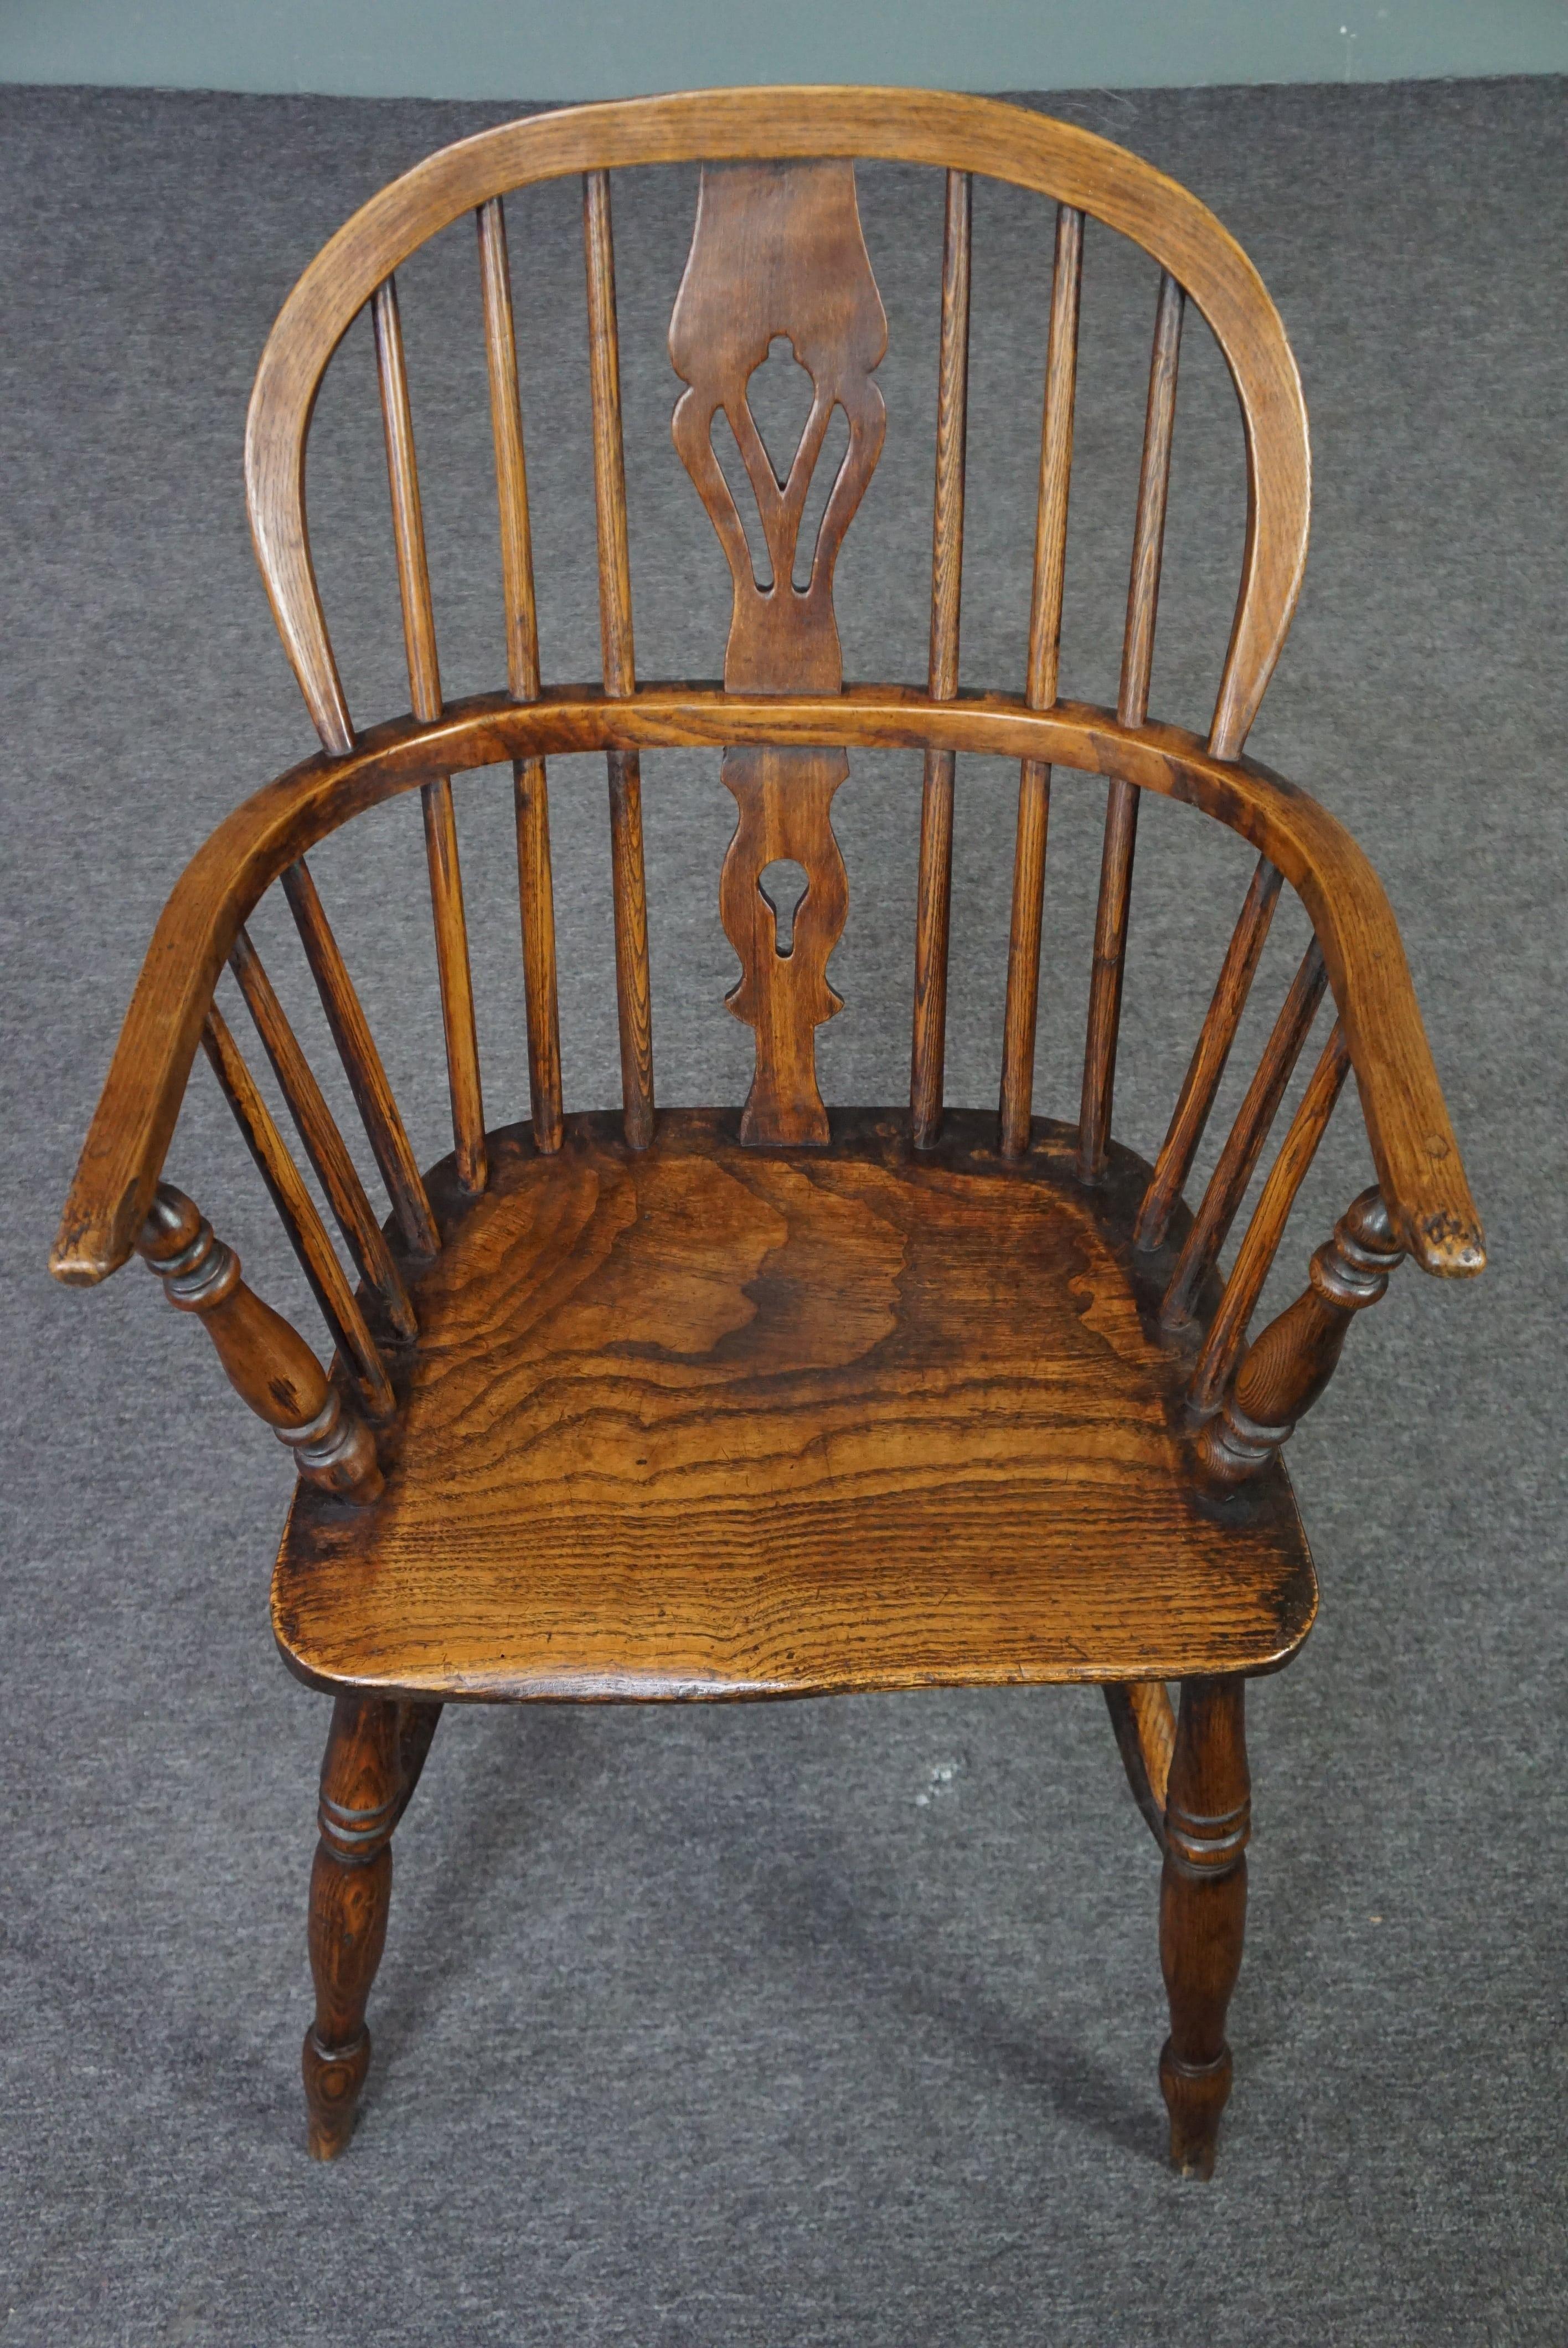 Wood Antique Windsor armchair/chair, English Low Back, 18th century For Sale